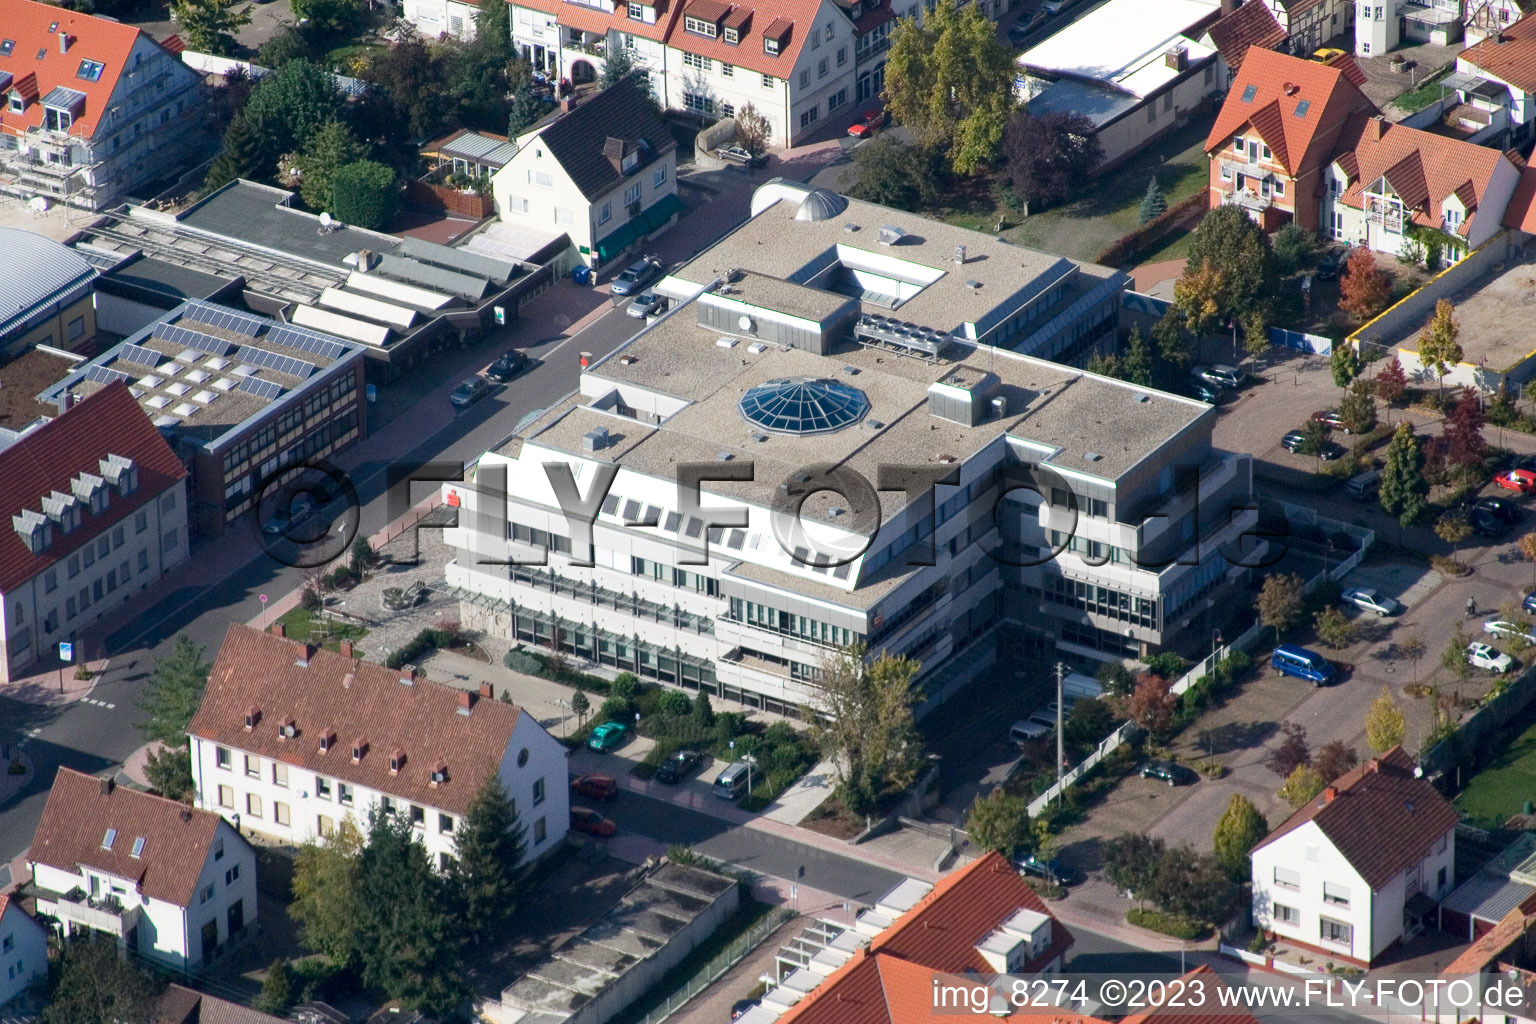 Aerial photograpy of Savings Bank in Kandel in the state Rhineland-Palatinate, Germany